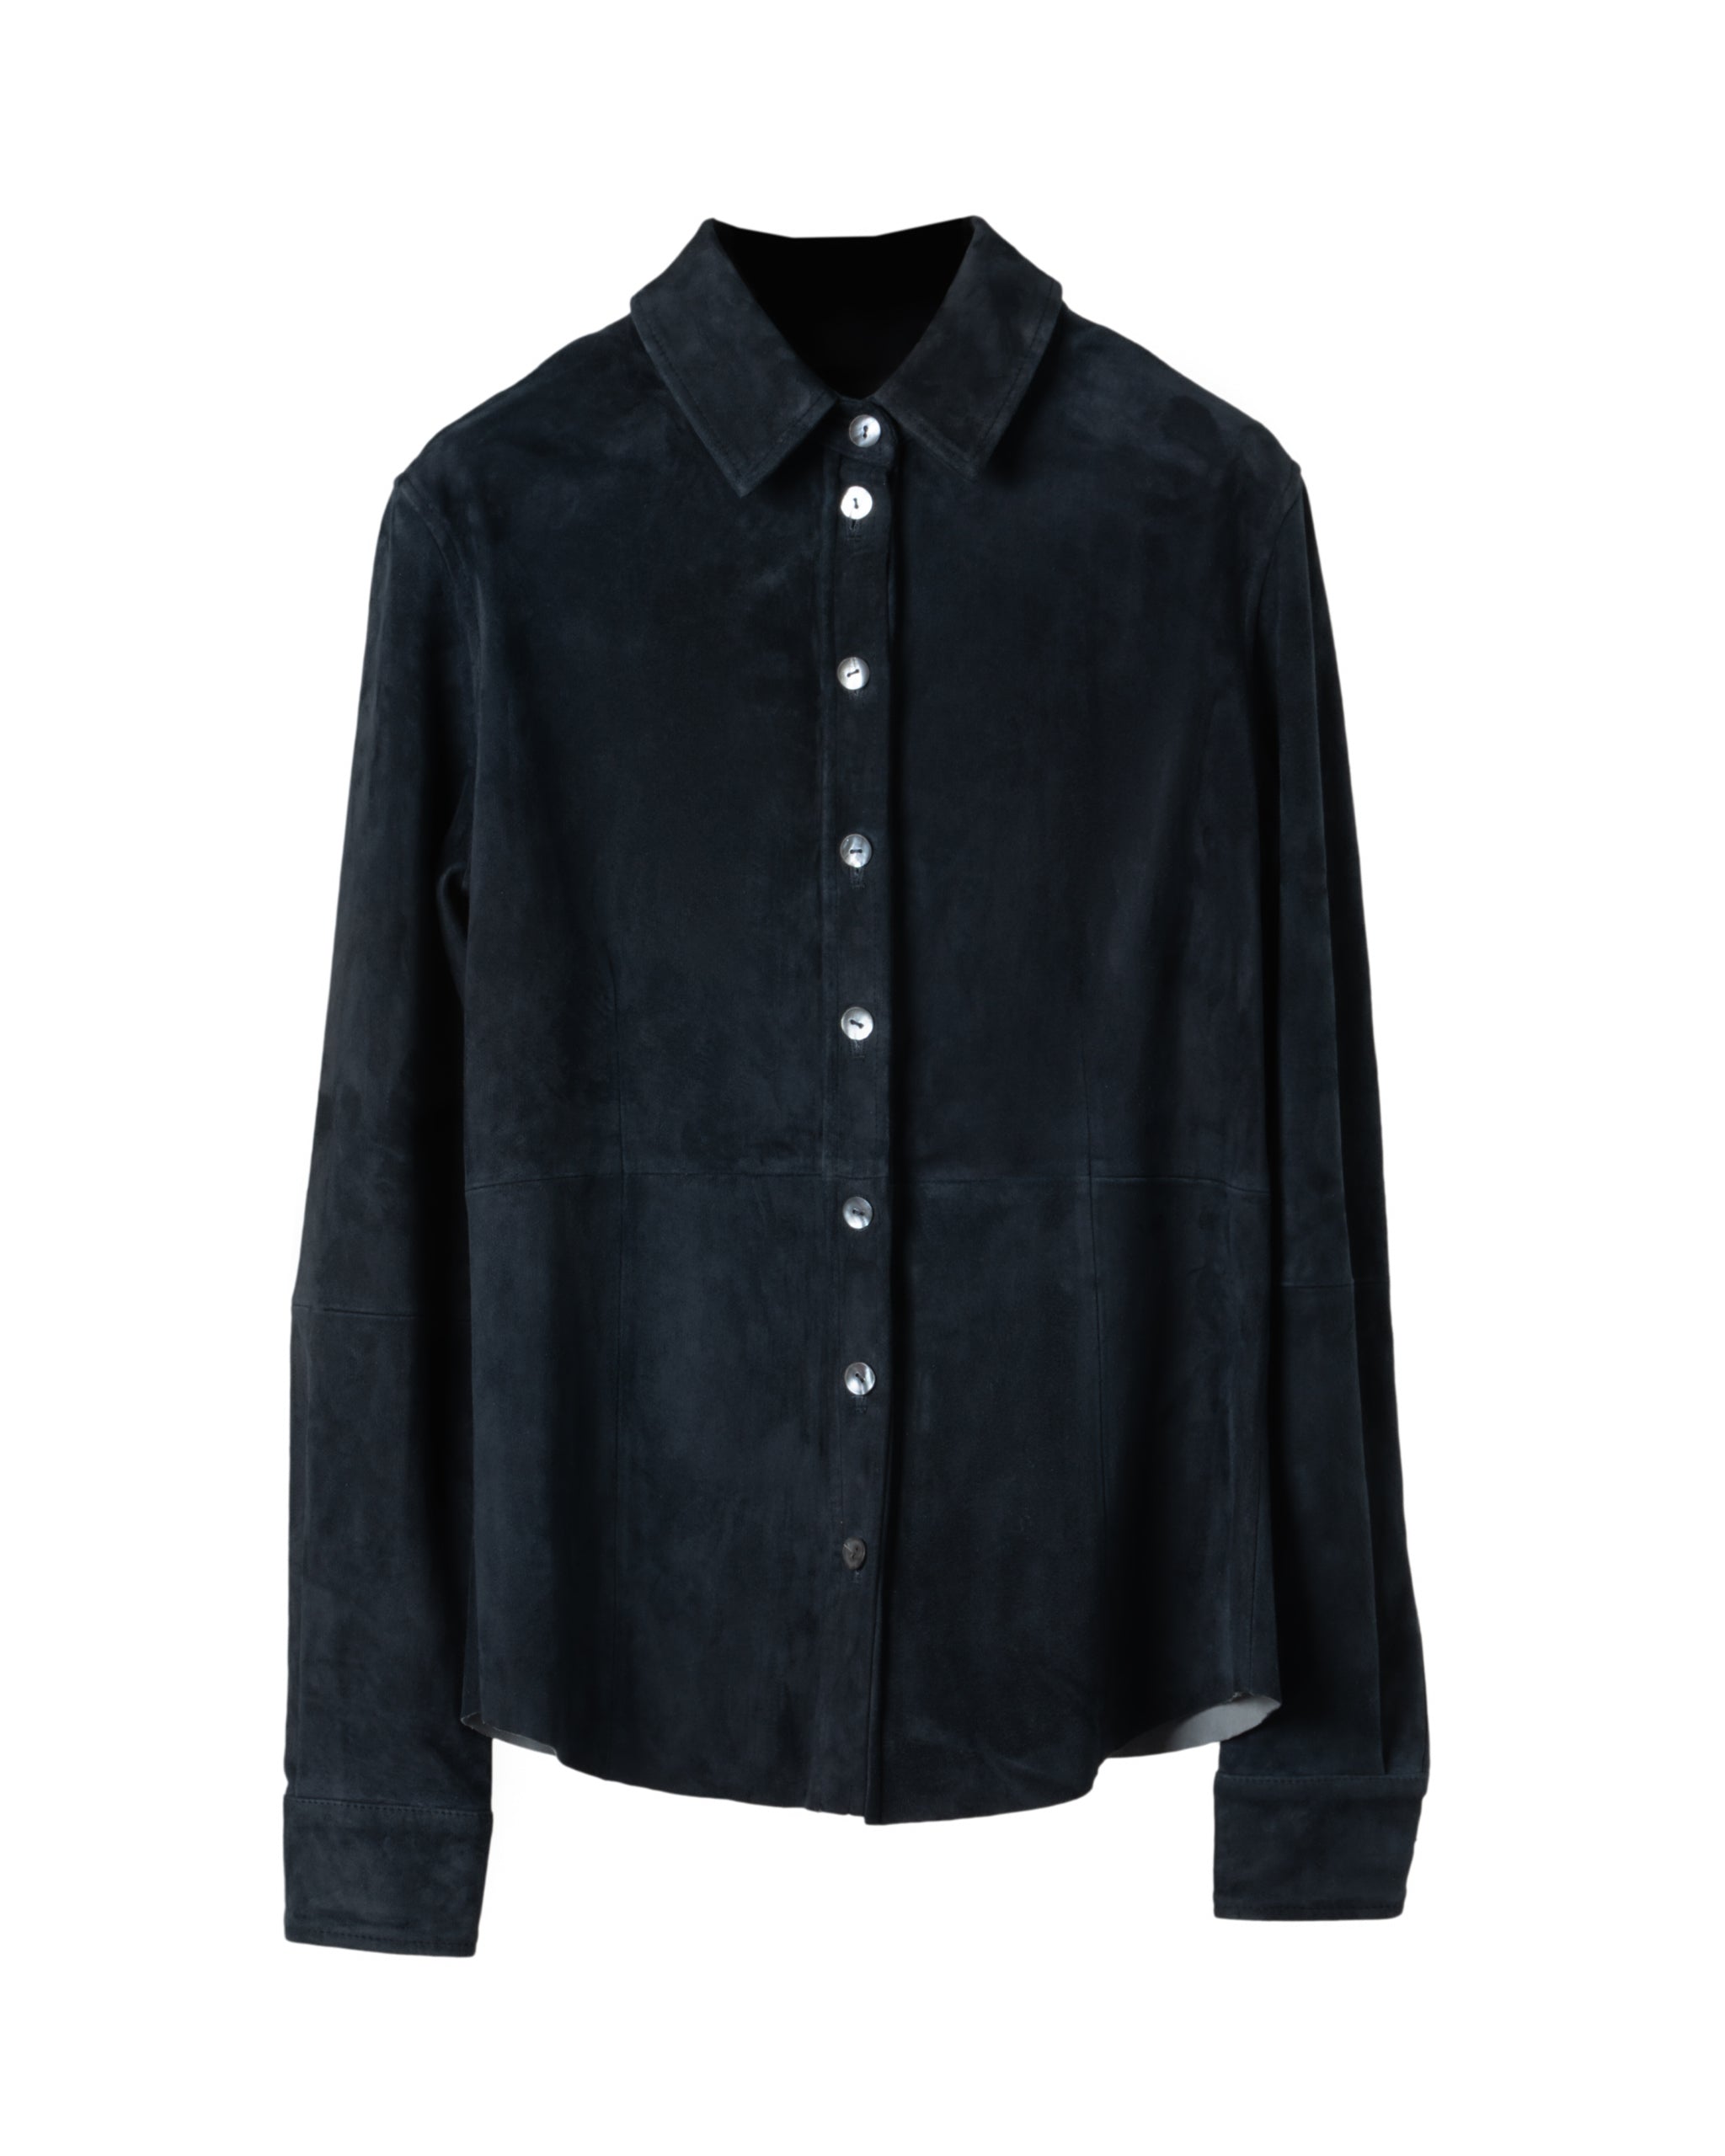 SUEDE STRETCH LEATHER SHIRT